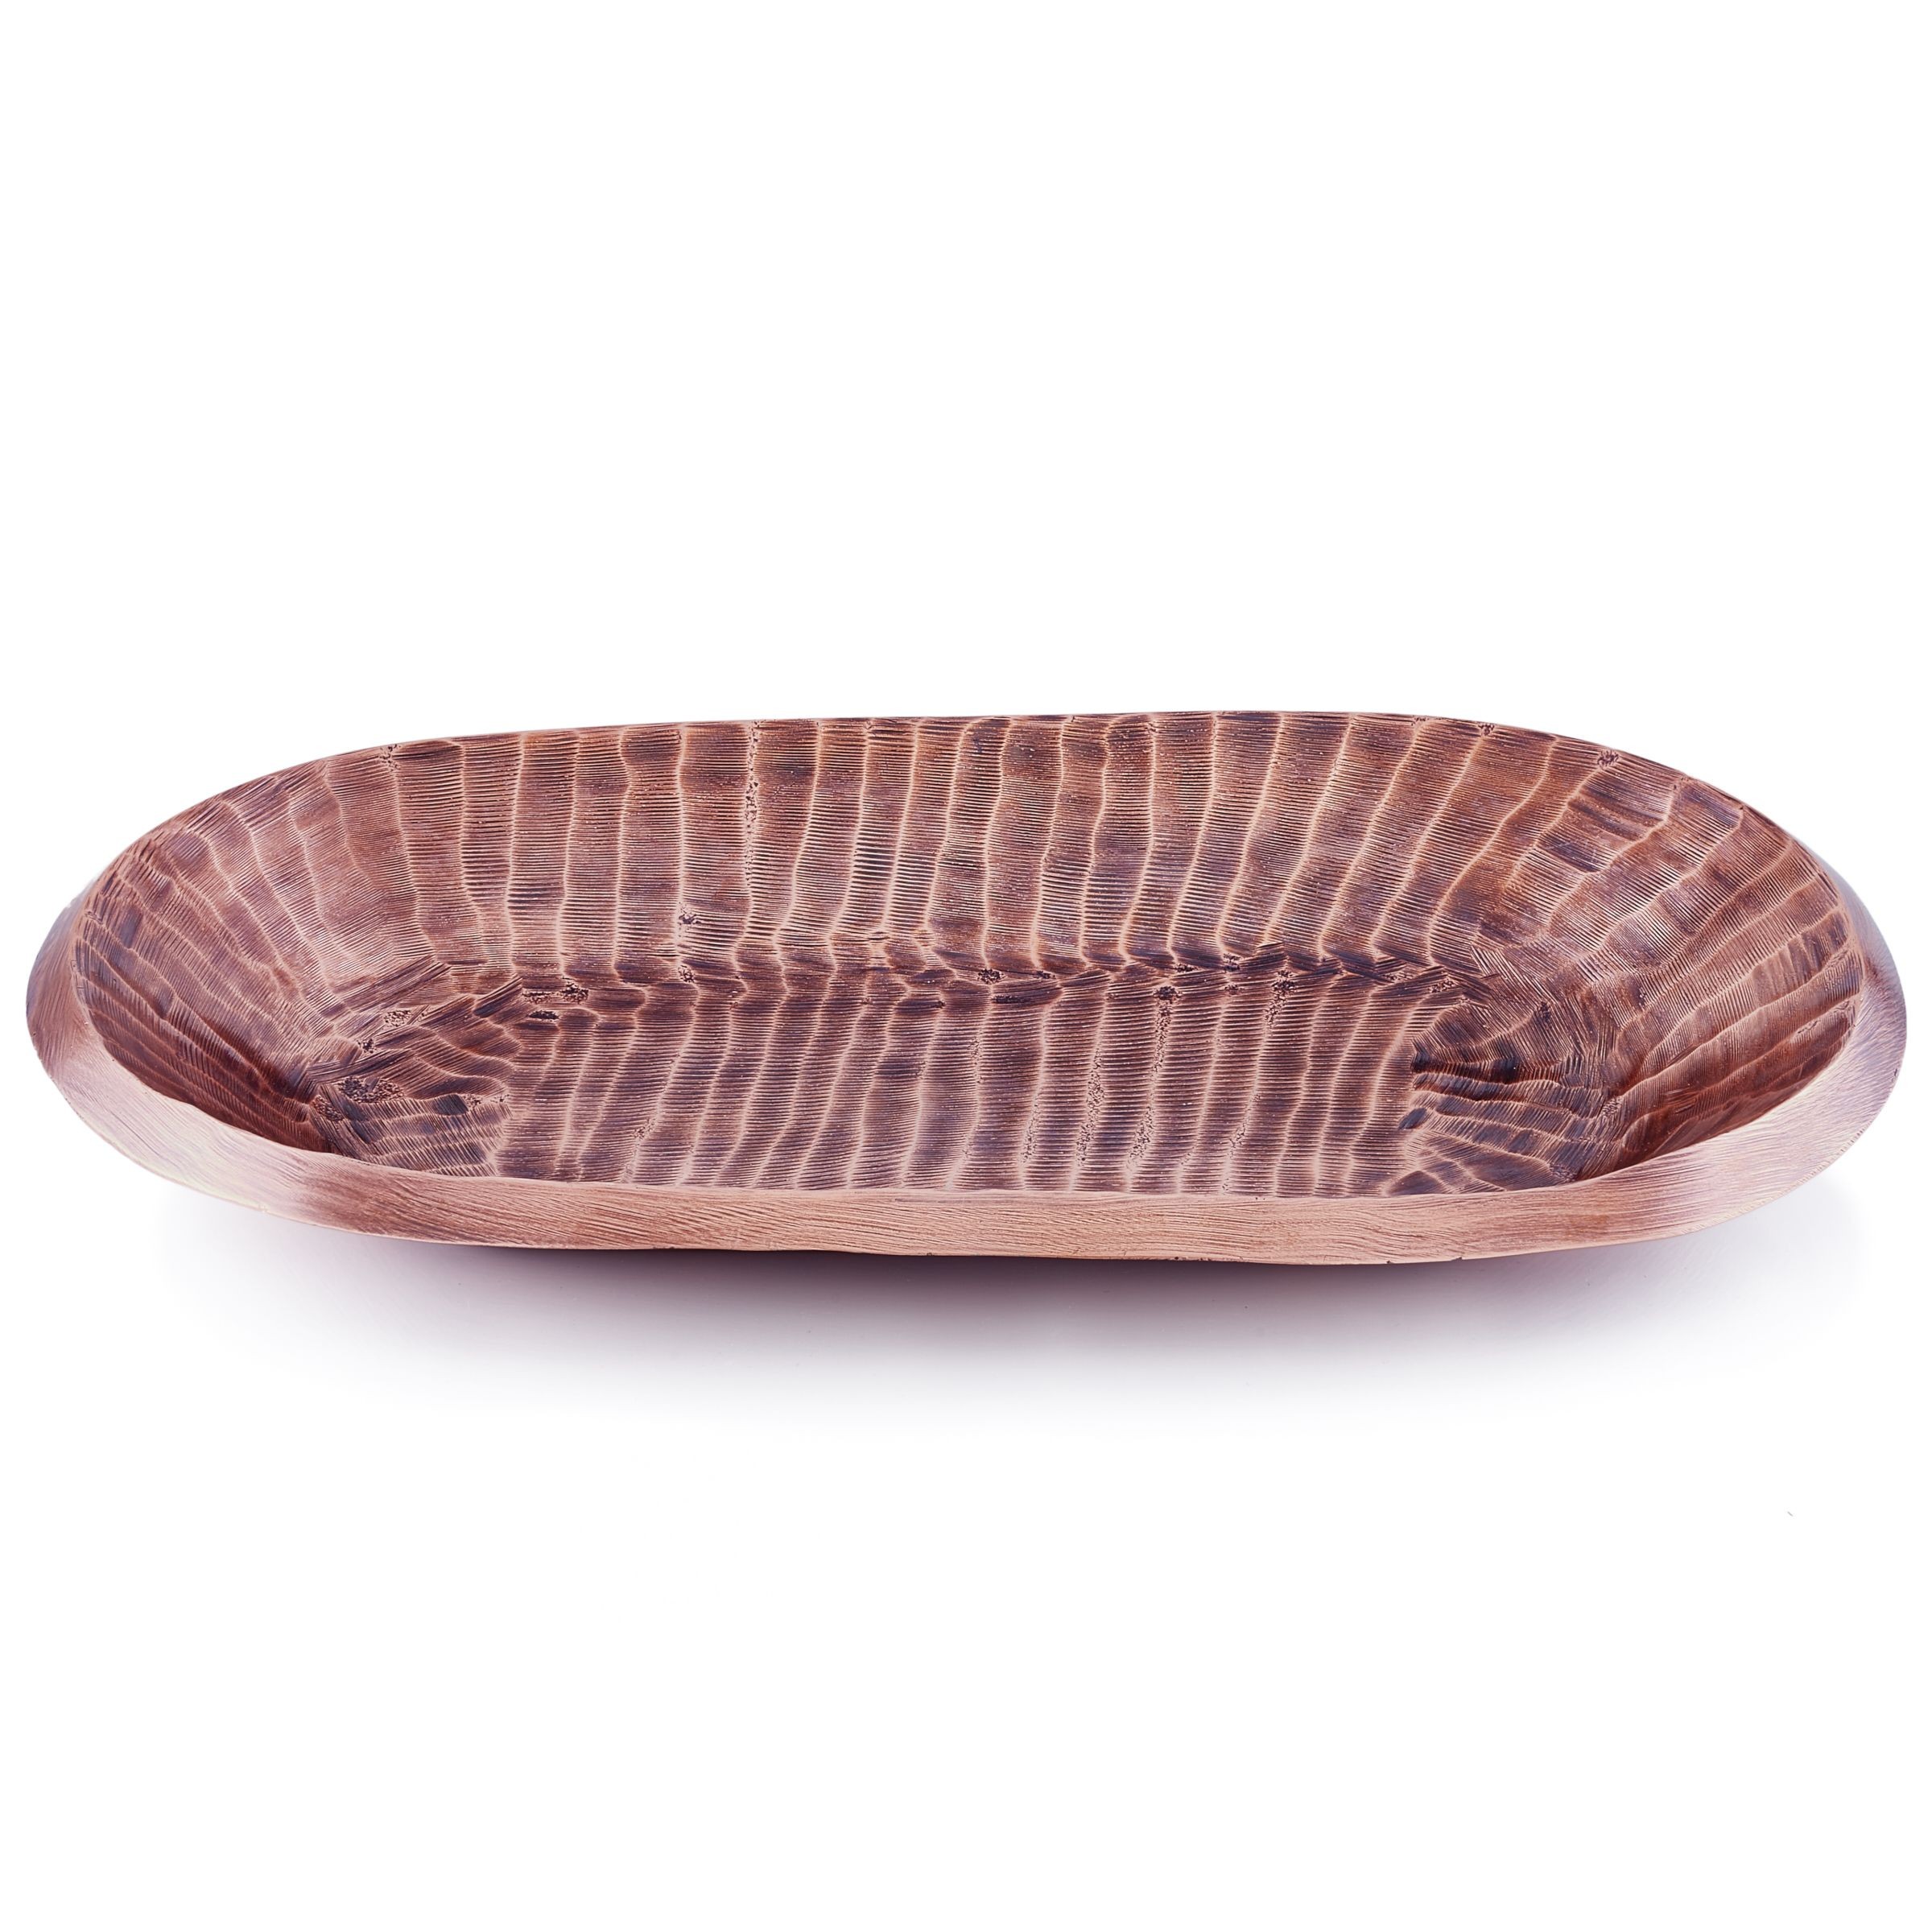 Old Dutch International A5124 Tribal Aluminum Oval Tray with Antique Copper Finish, 17 1/4" x 10 1/4"